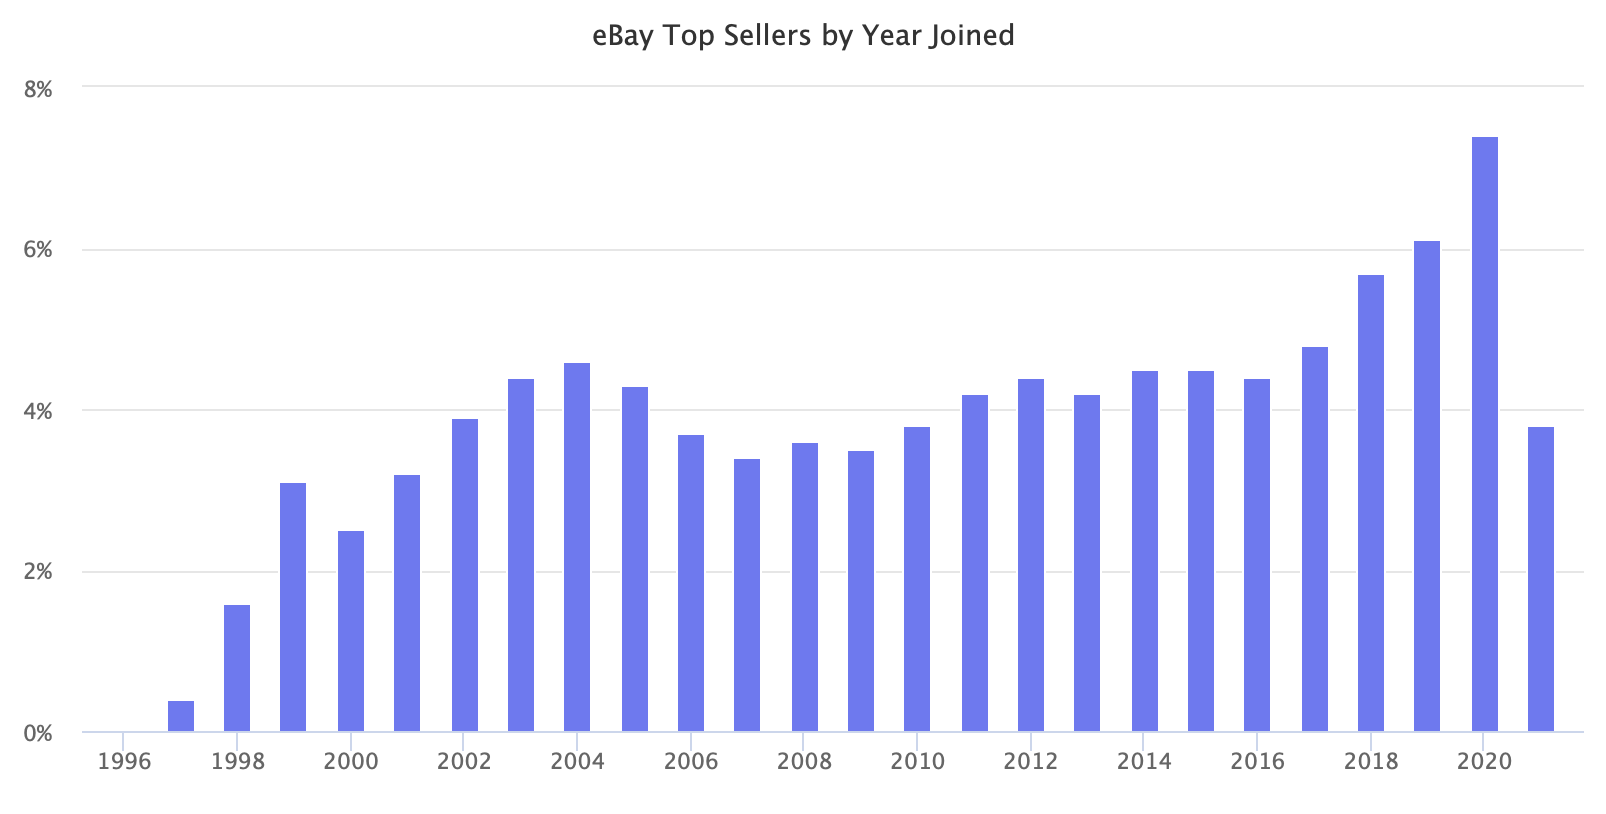 eBay Top Sellers by Year Joined